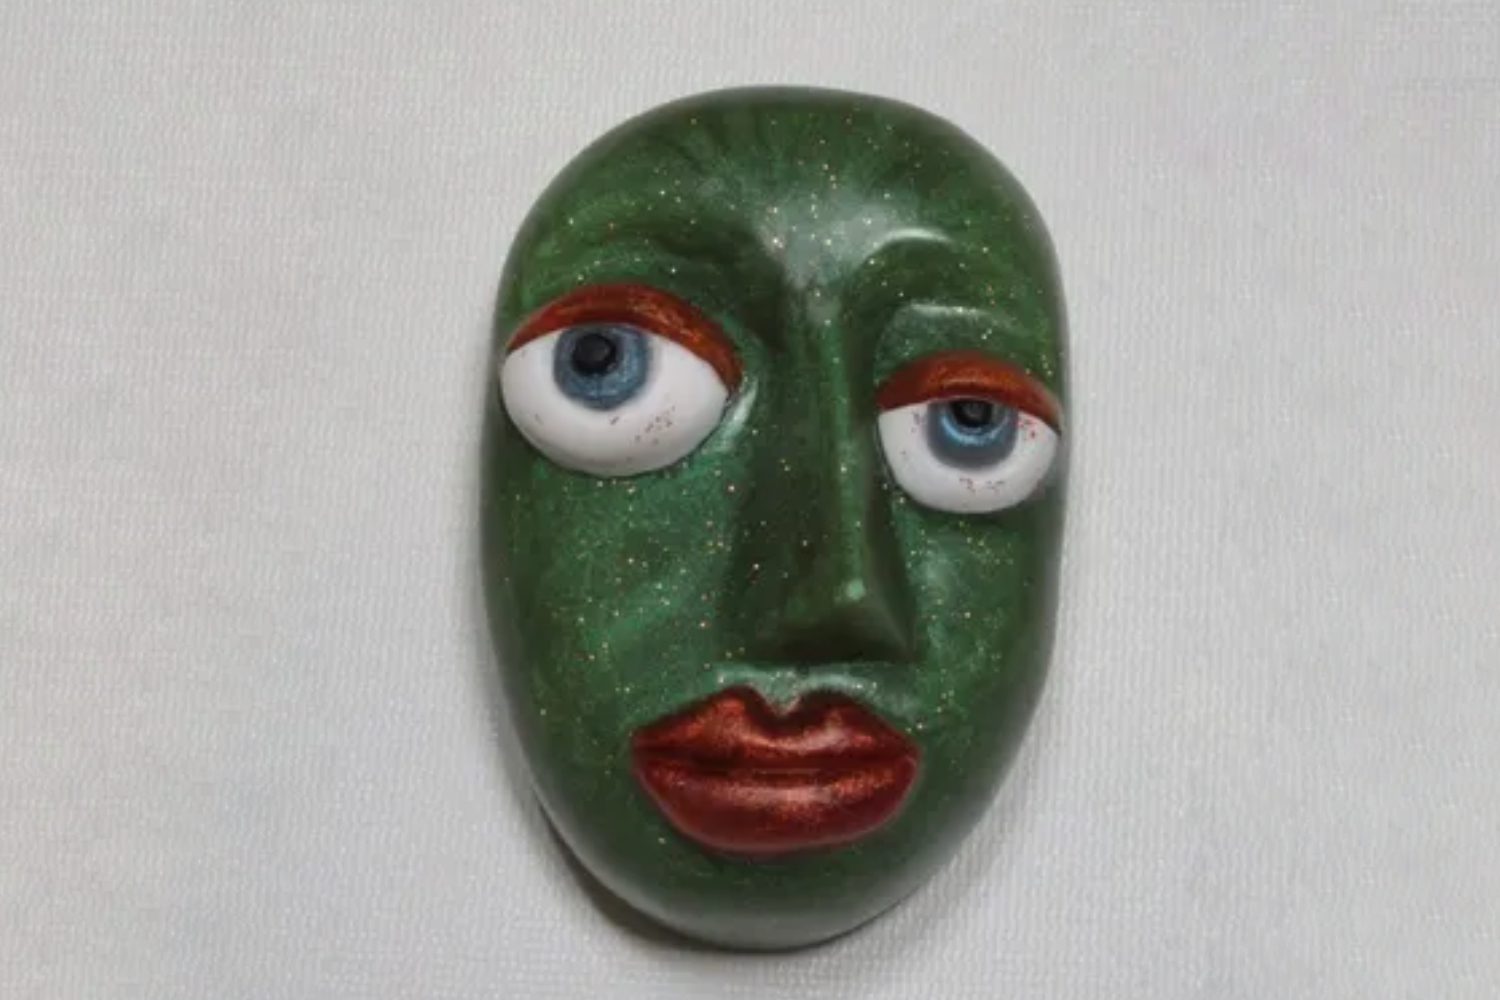 A green face with red lips and blue eyes.